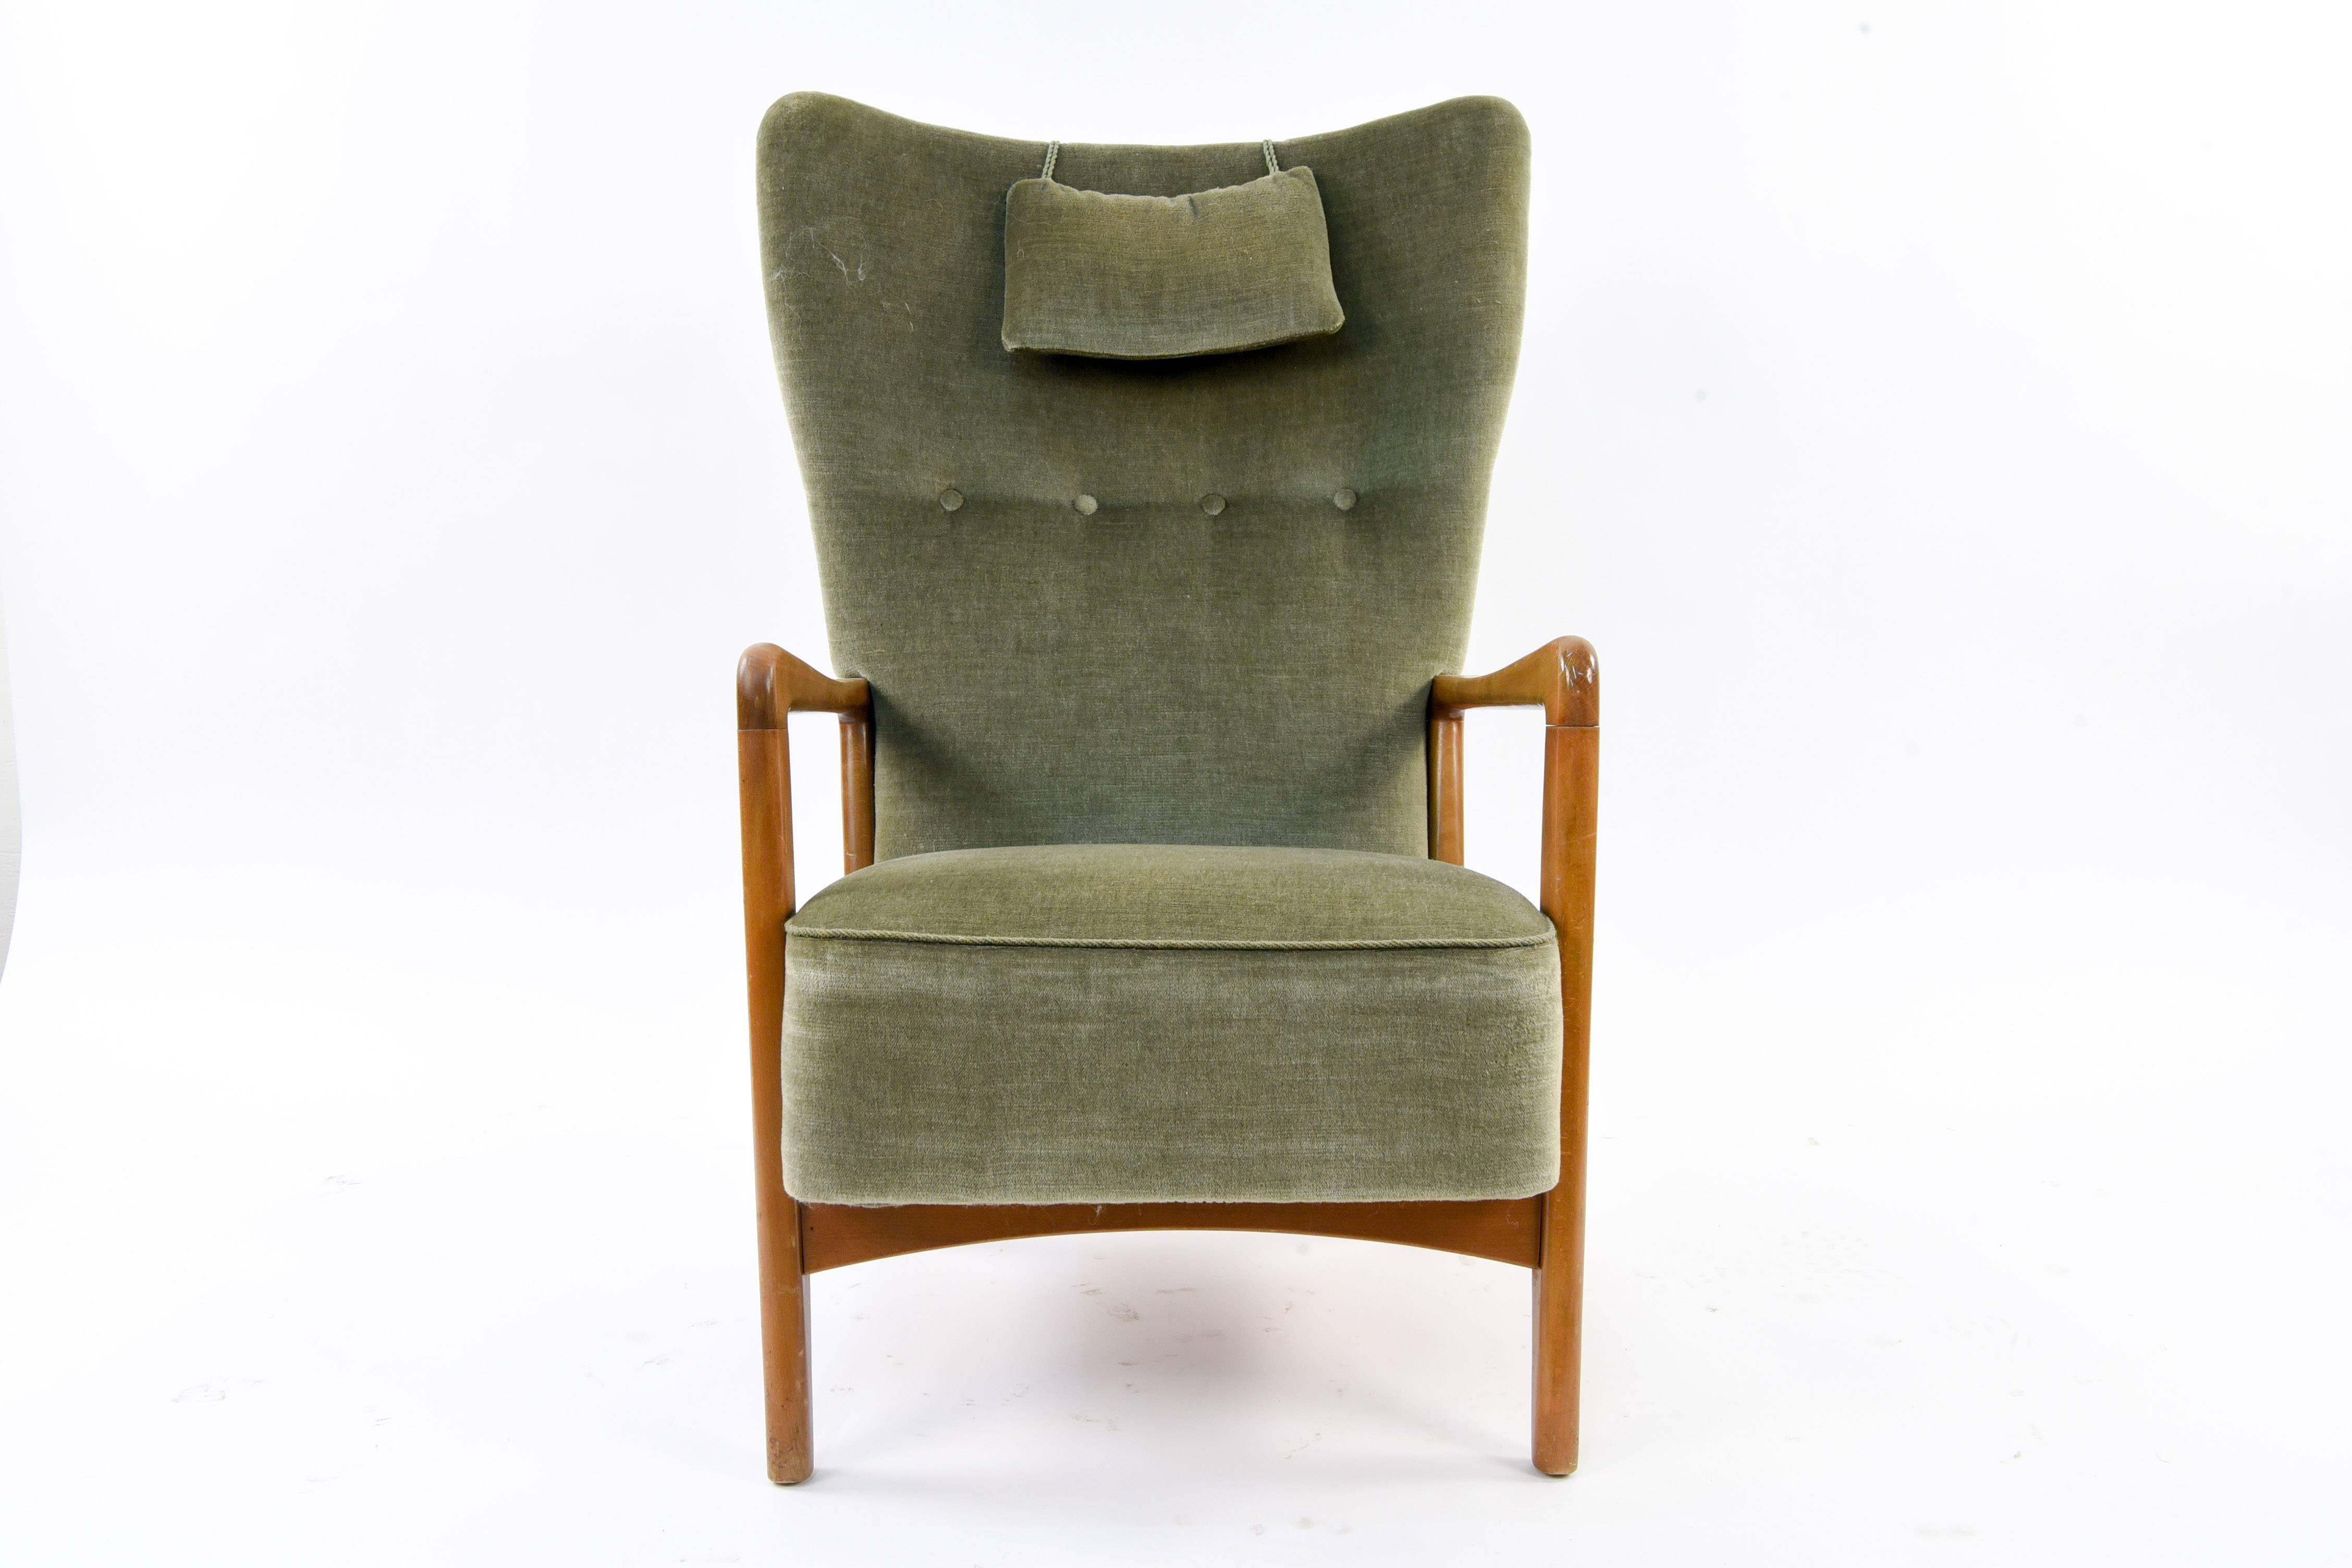 This midcentury Danish lounge chair is upholstered in a lovely olive toned fabric. Designed by Soren Hansen for Fritz Hansen, circa 1940s. Features a tufted back and removable head rest pillow.